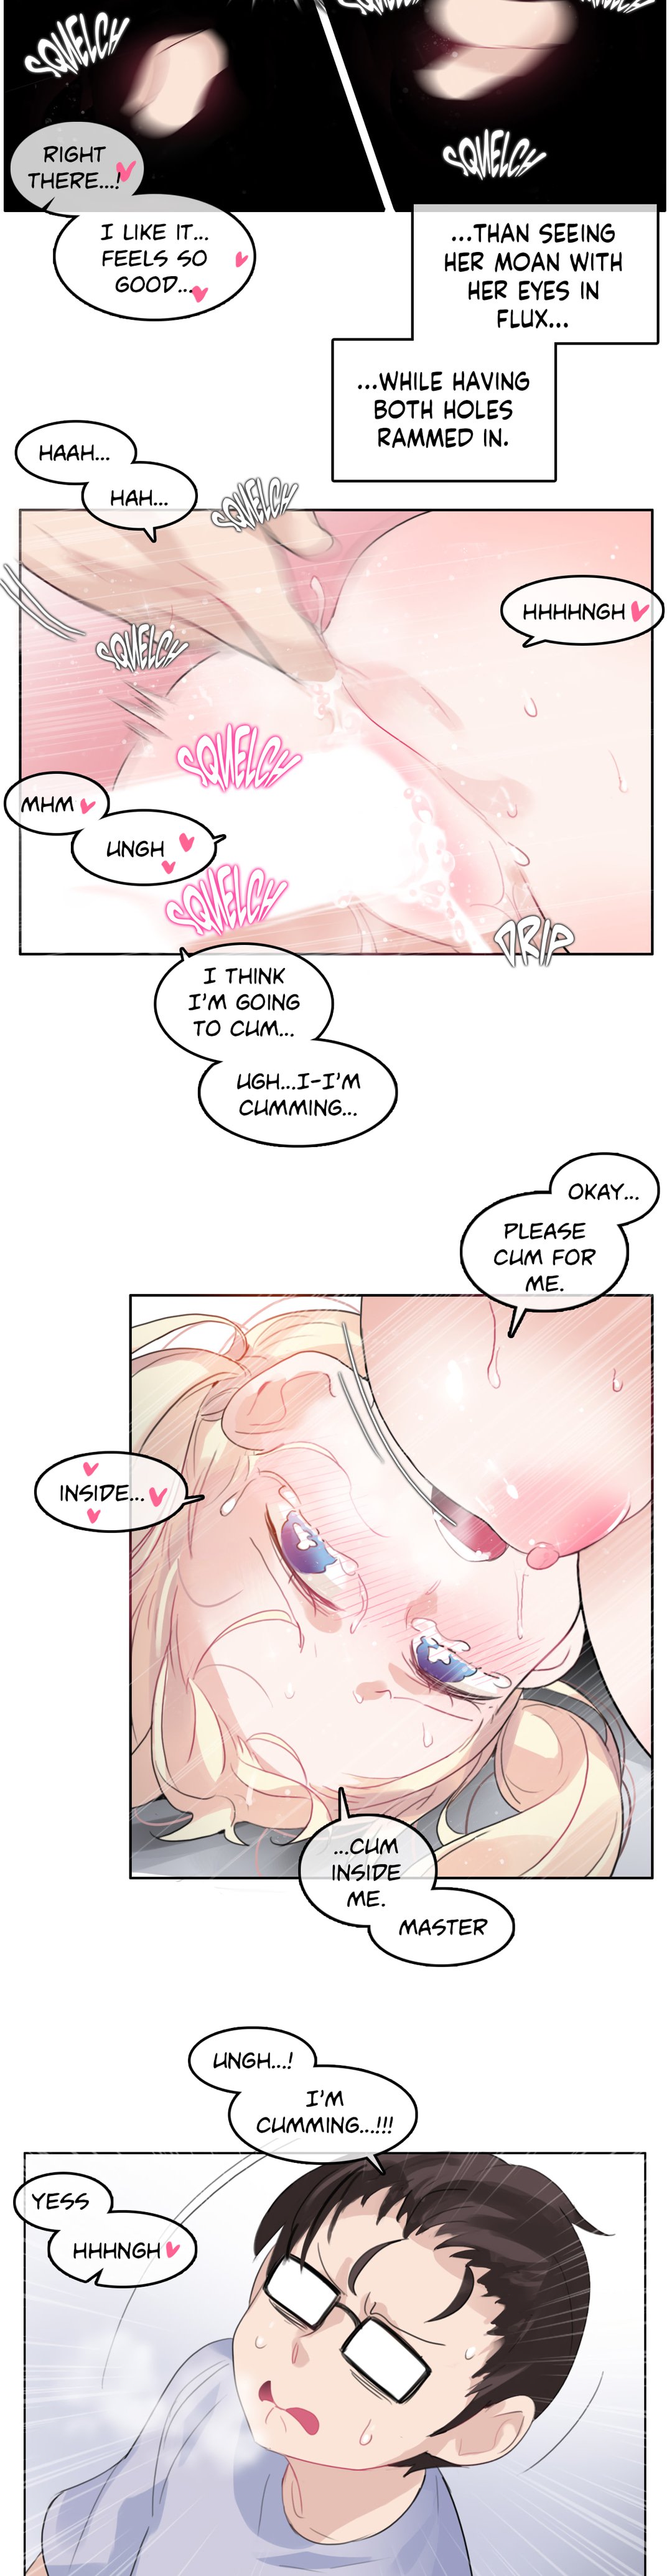 A Pervert's Daily Life - 40 page 9